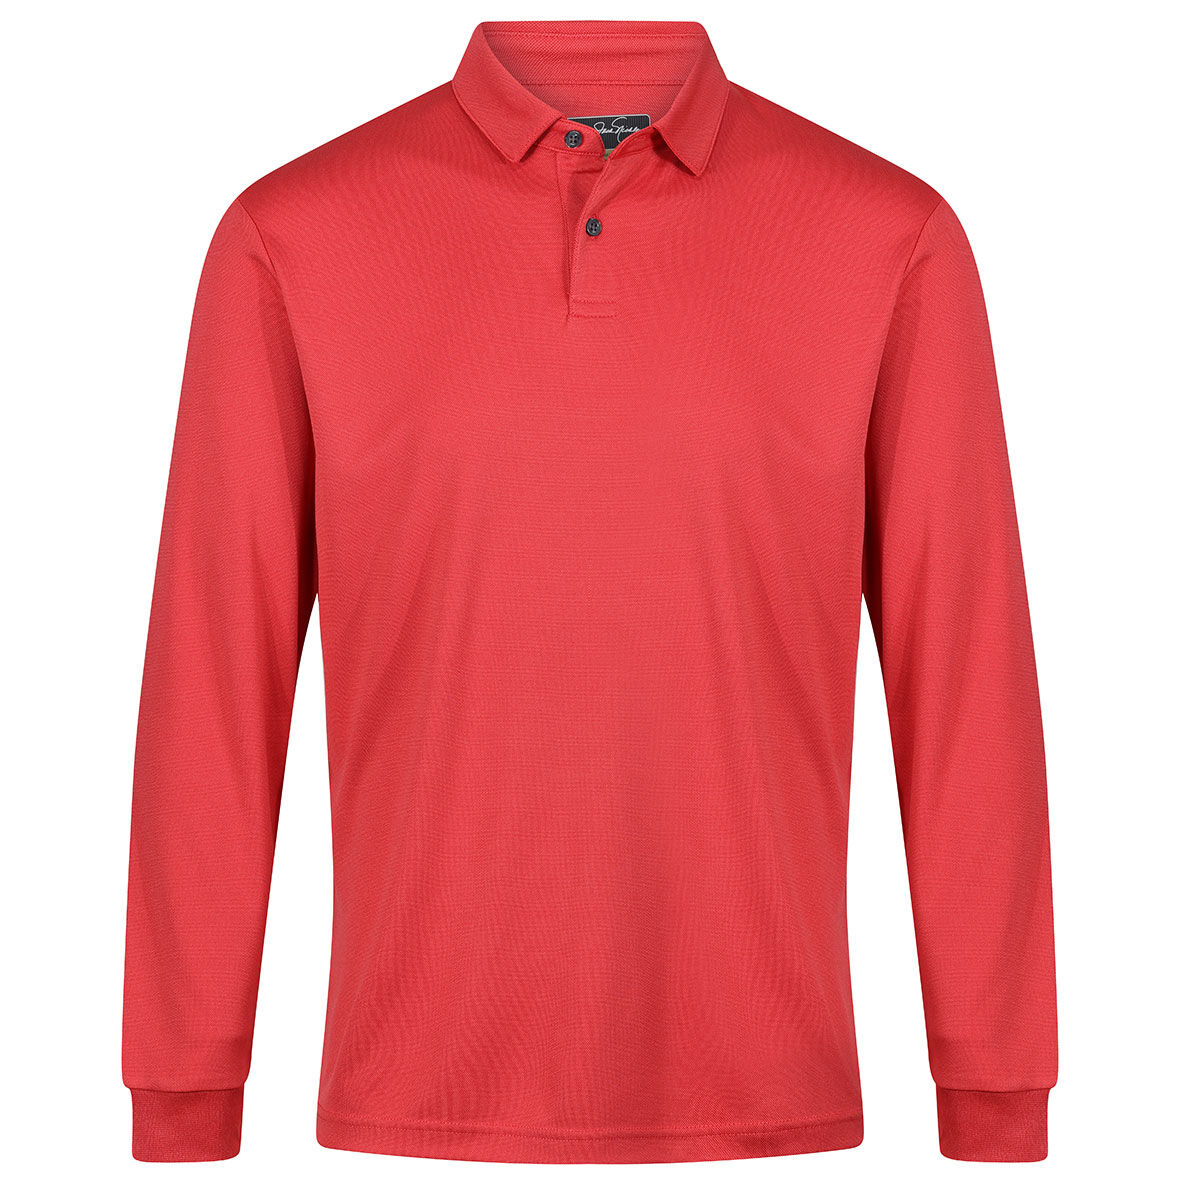 Jack Nicklaus Men's Classic Long Sleeve Golf Polo Shirt, Mens, Red, Xl | American Golf von Jack Nicklaus